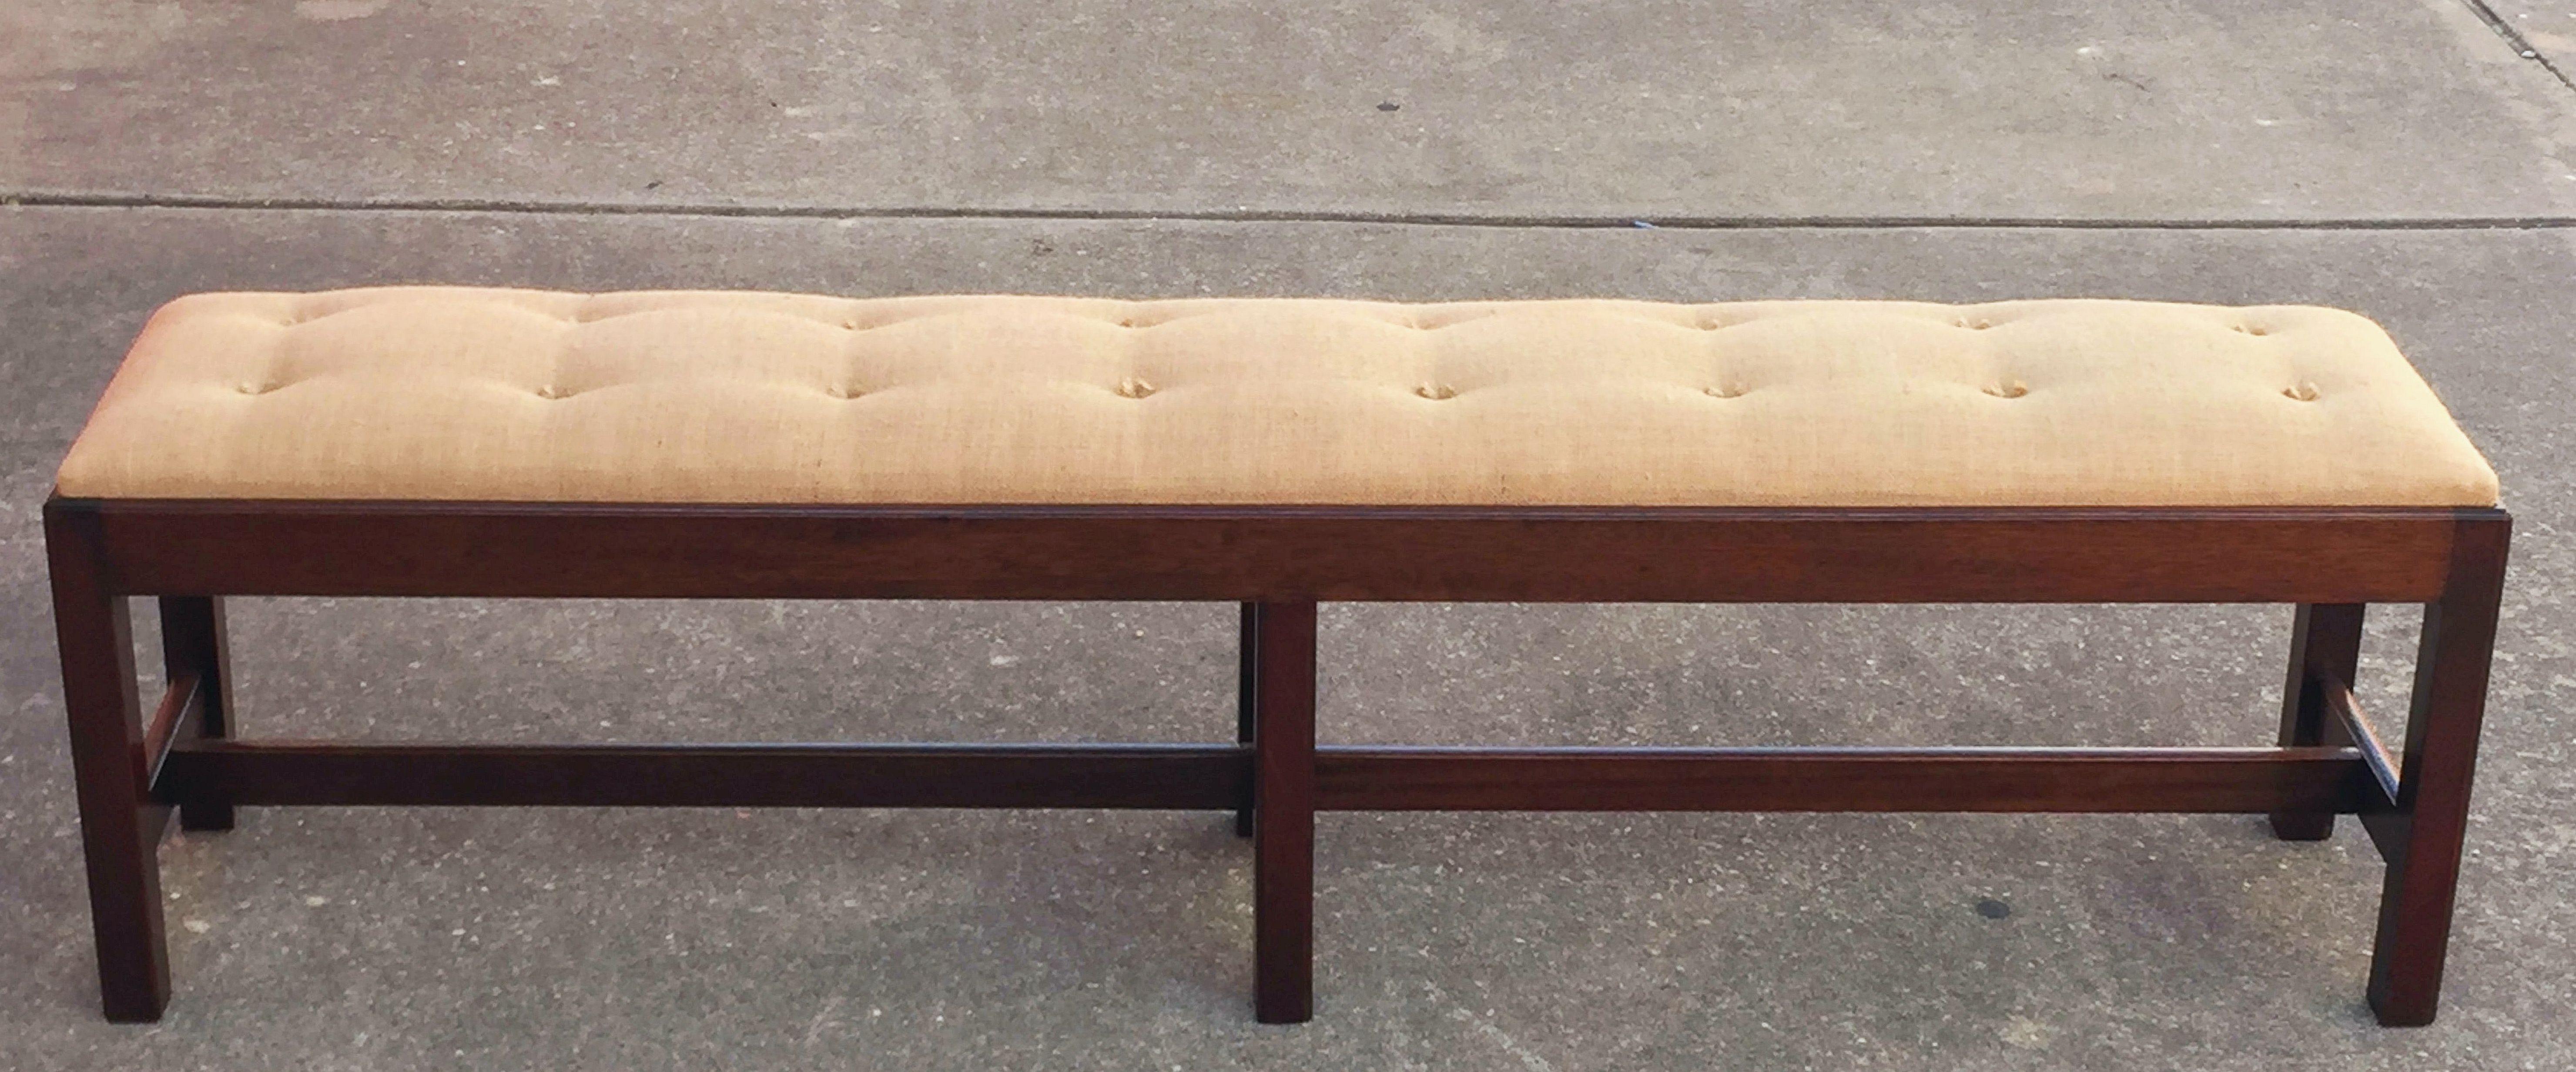 A fine English upholstered long bench or seat of mahogany, in the Chippendale style, featuring a rectangular tufted cushion top over a stretcher base on six canted legs.

DIMENSIONS:  H 19 in. x W 71.5 in. x D 14 in.